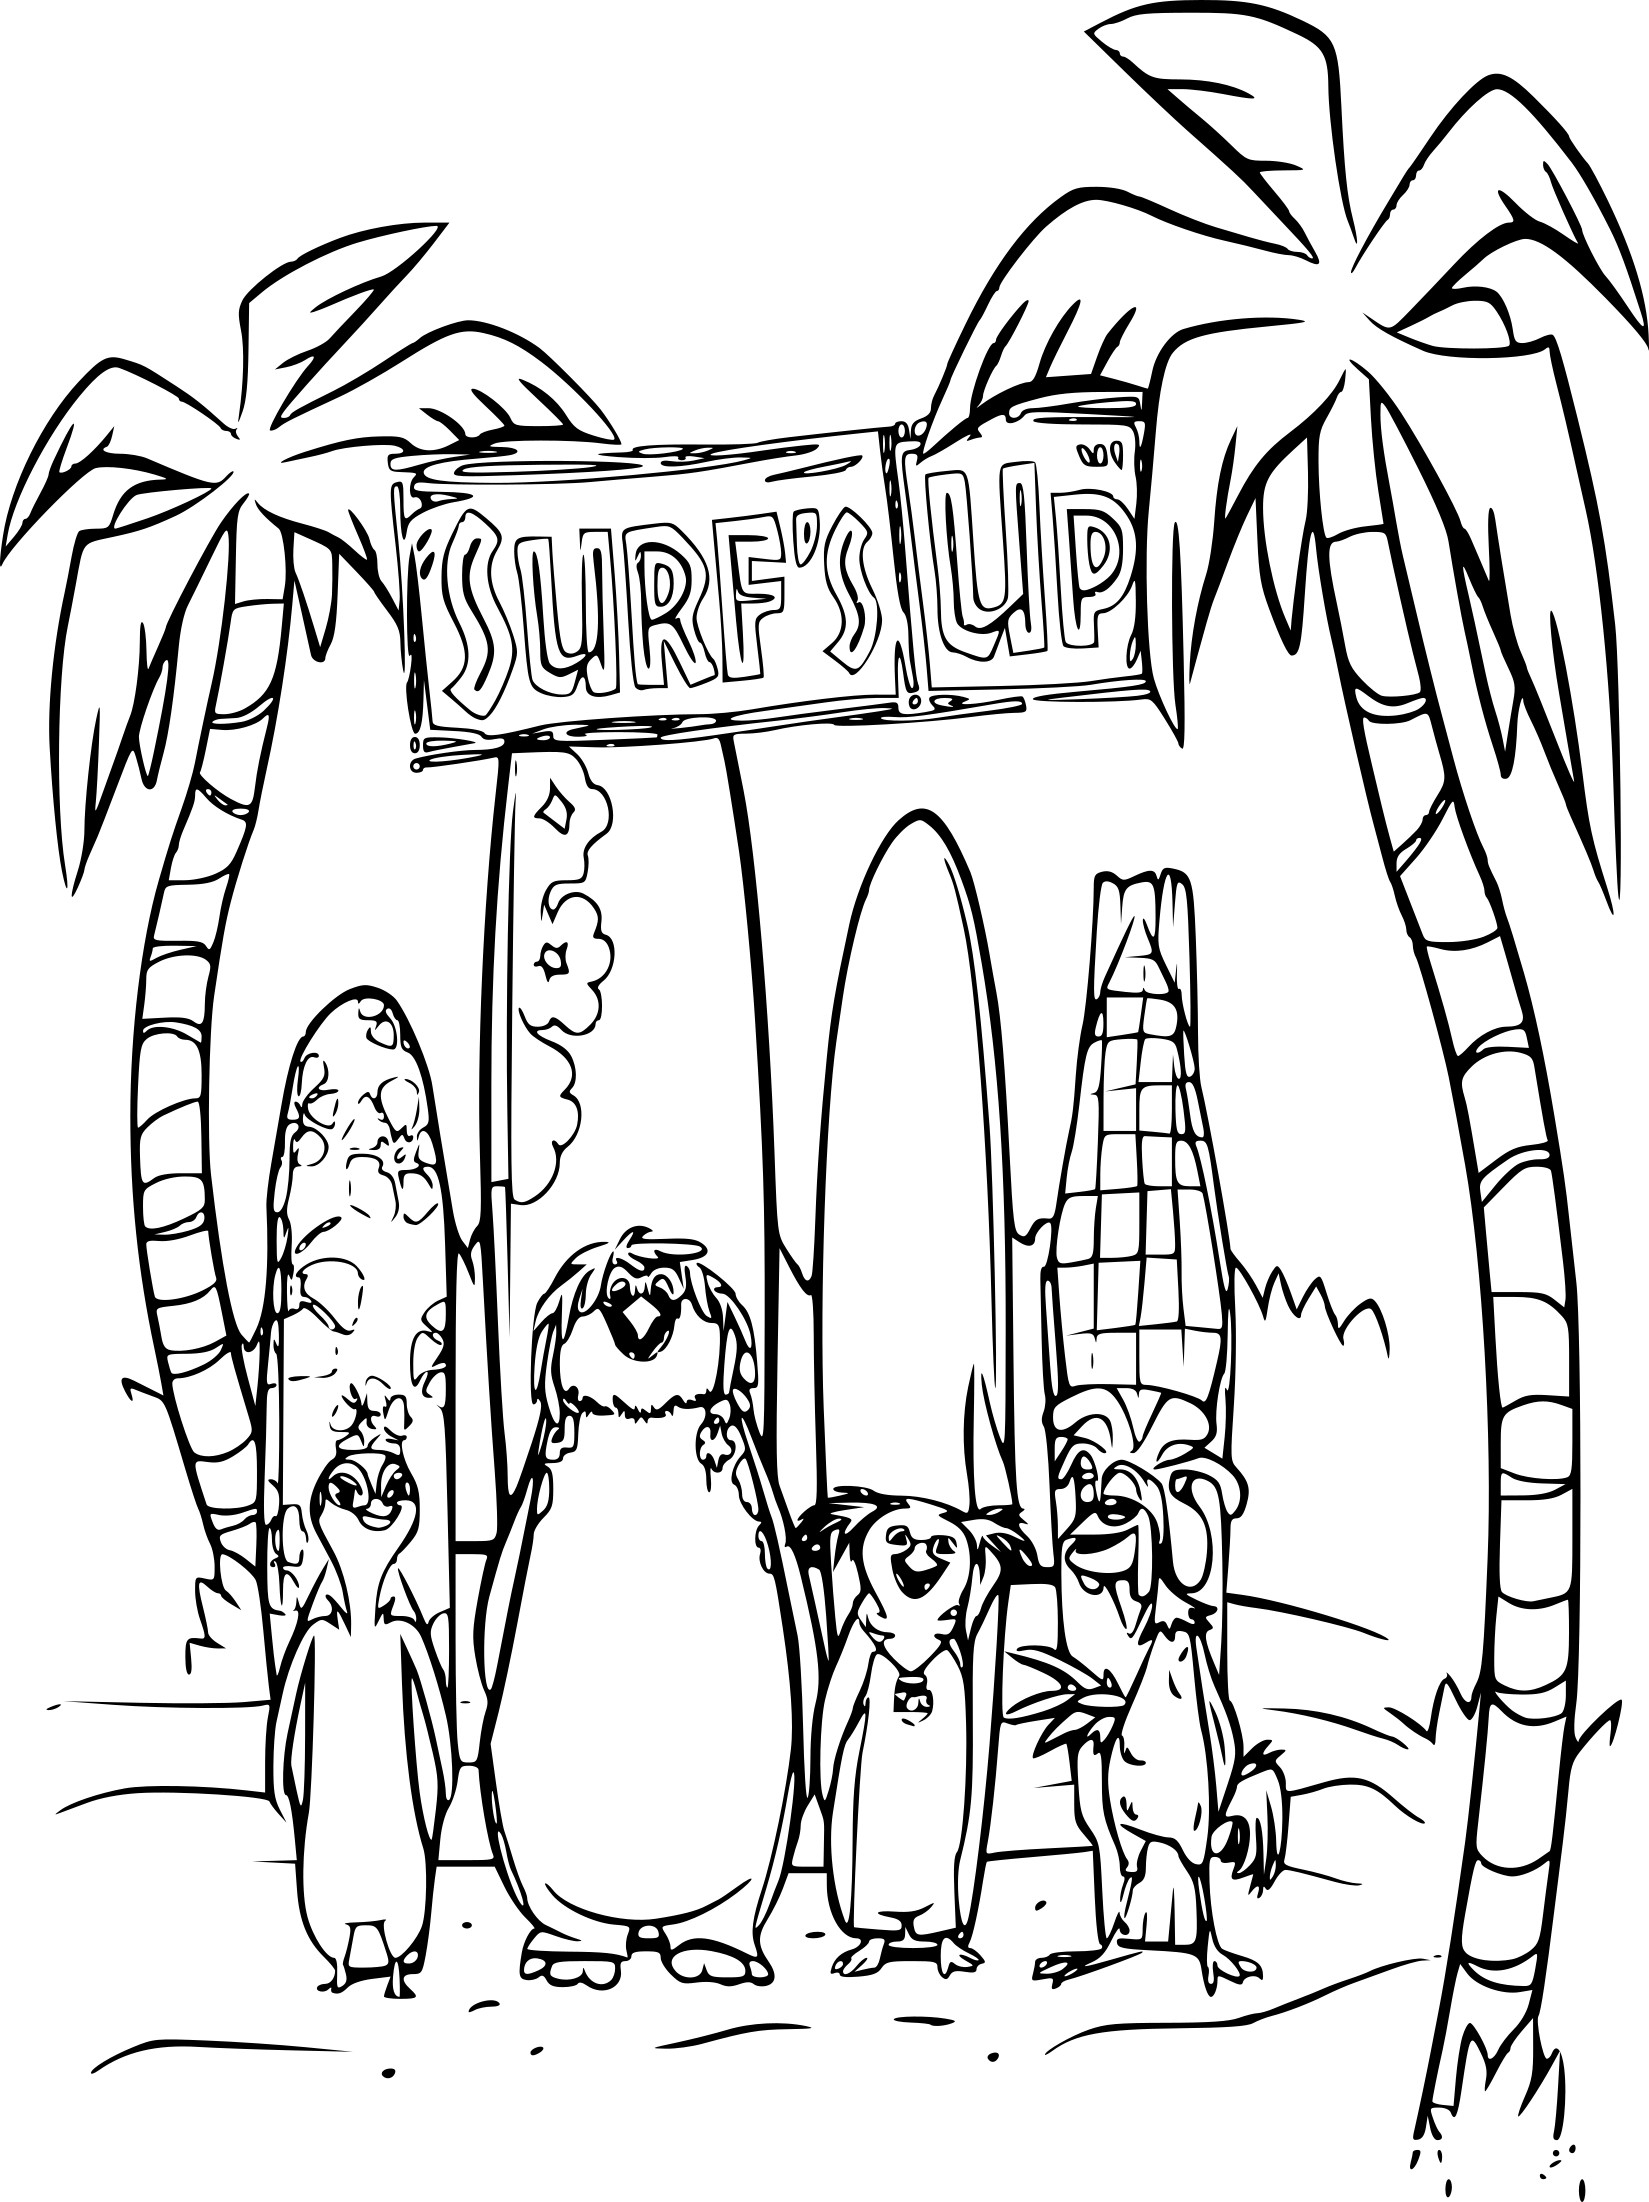 The Kings Of The Snow Free coloring page